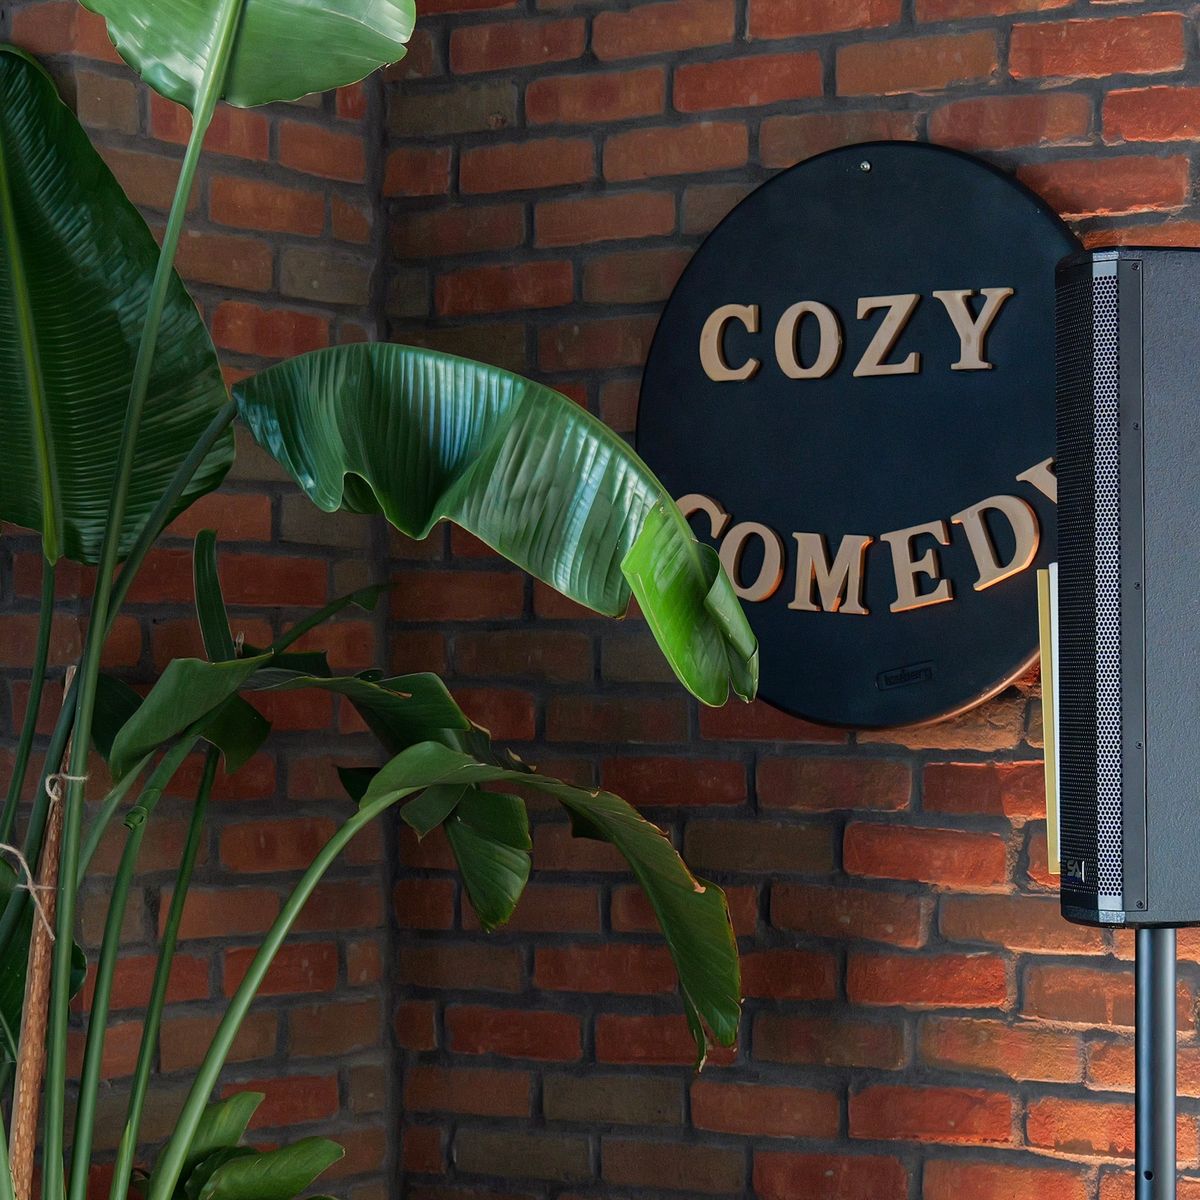 Cozy Comedy Staring Wolfgang Gohlke